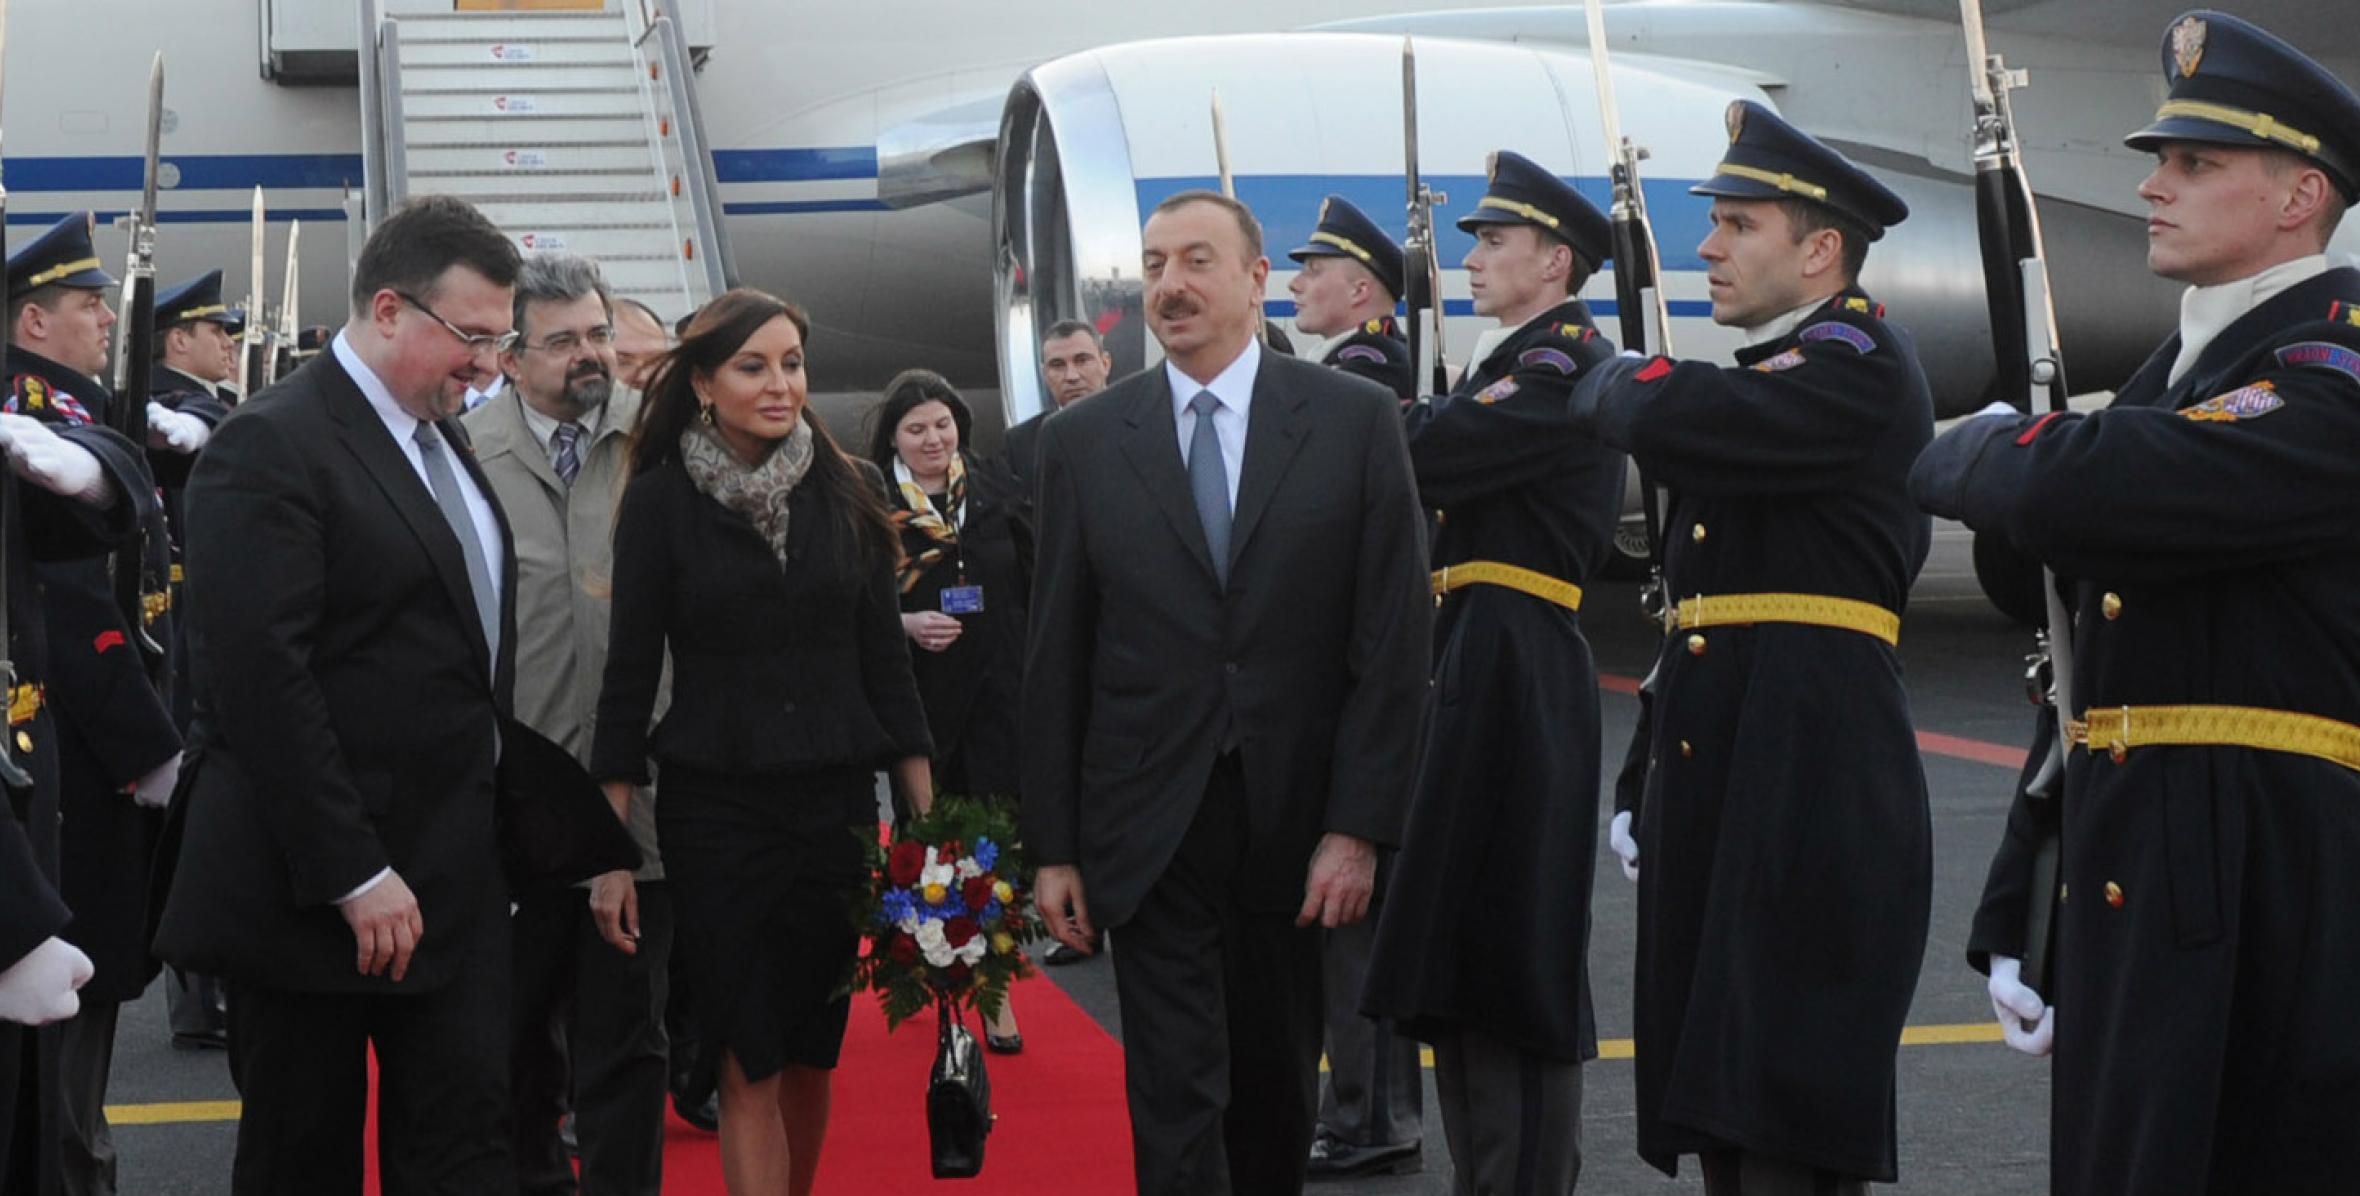 Ilham Aliyev arrived in the Czech Republic on a state visit